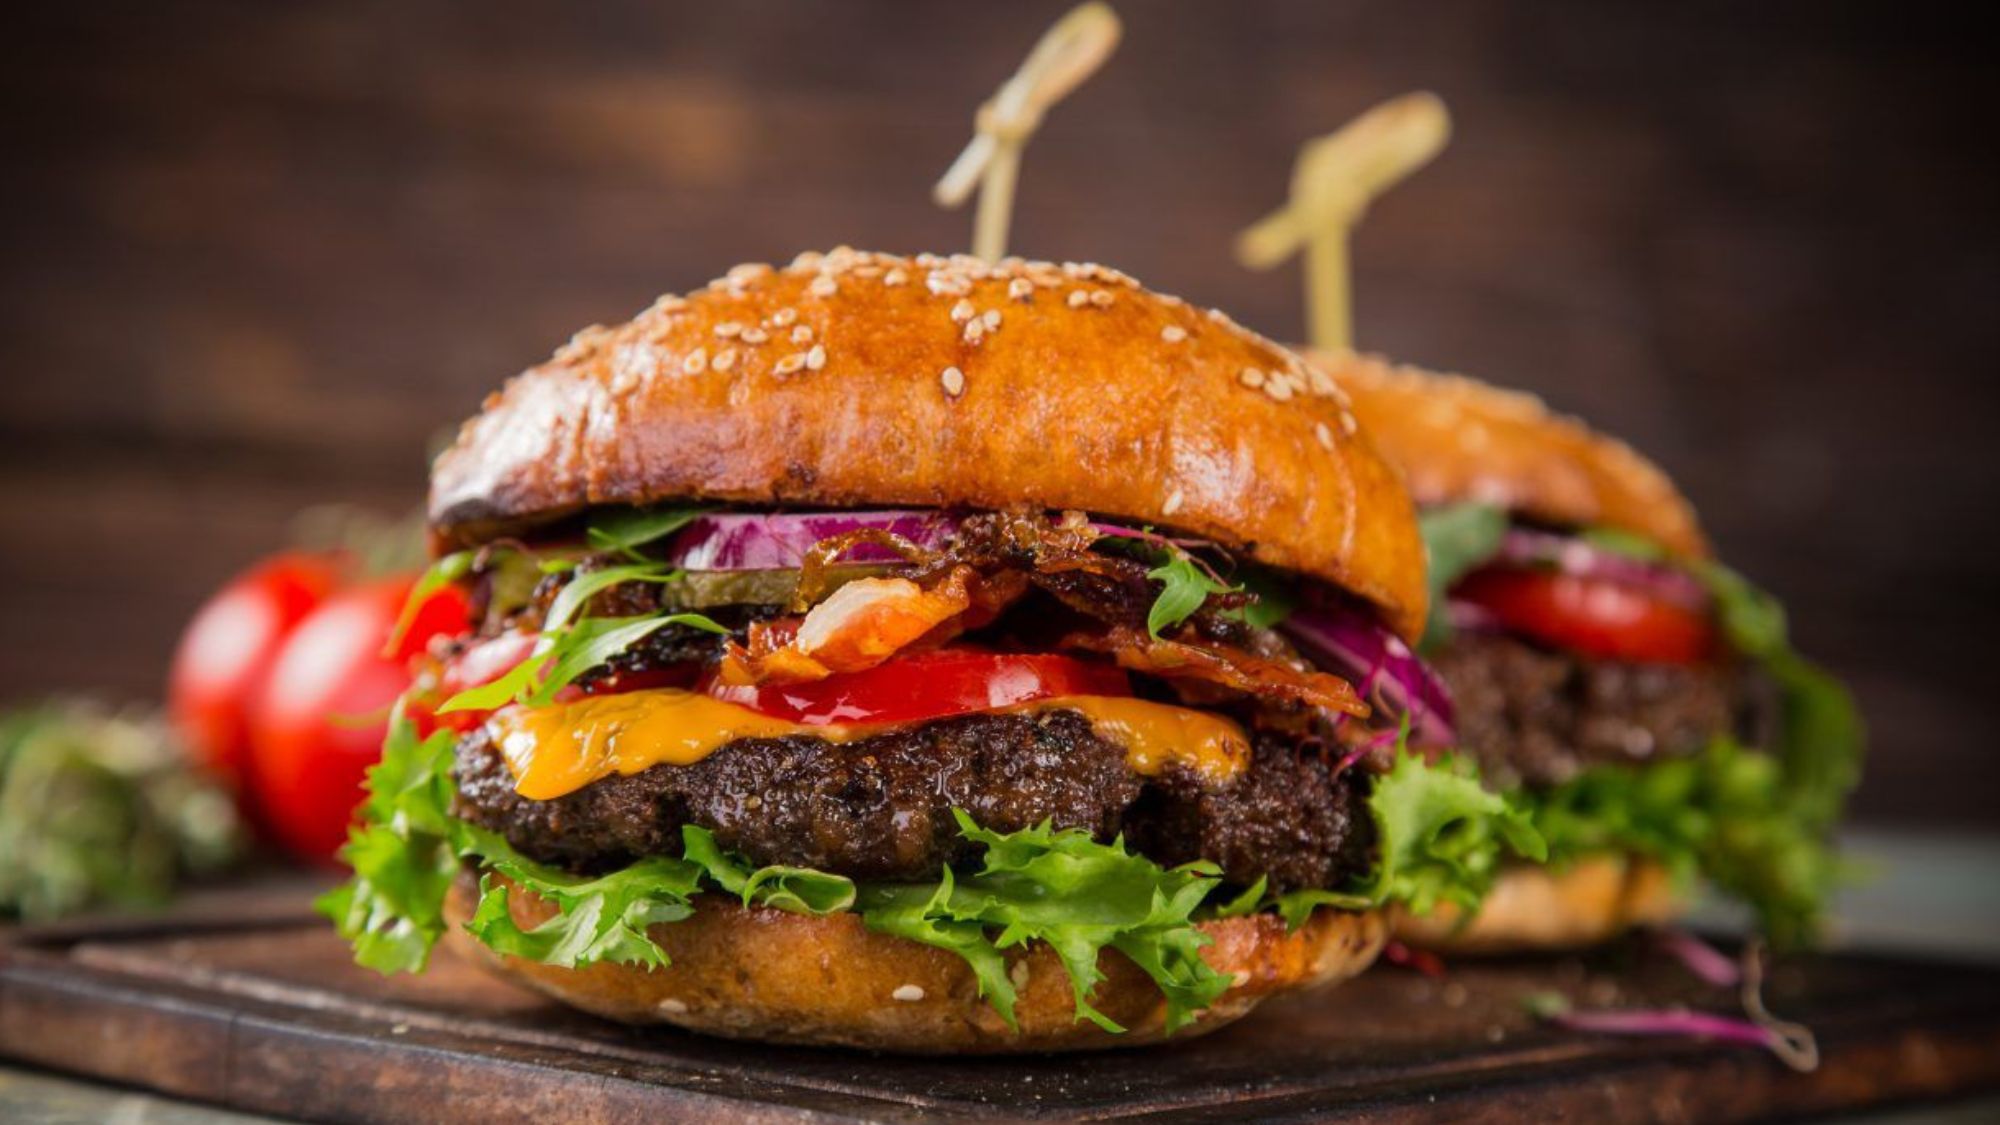 A perfect burger with texture and taste alongwith best burger toppings